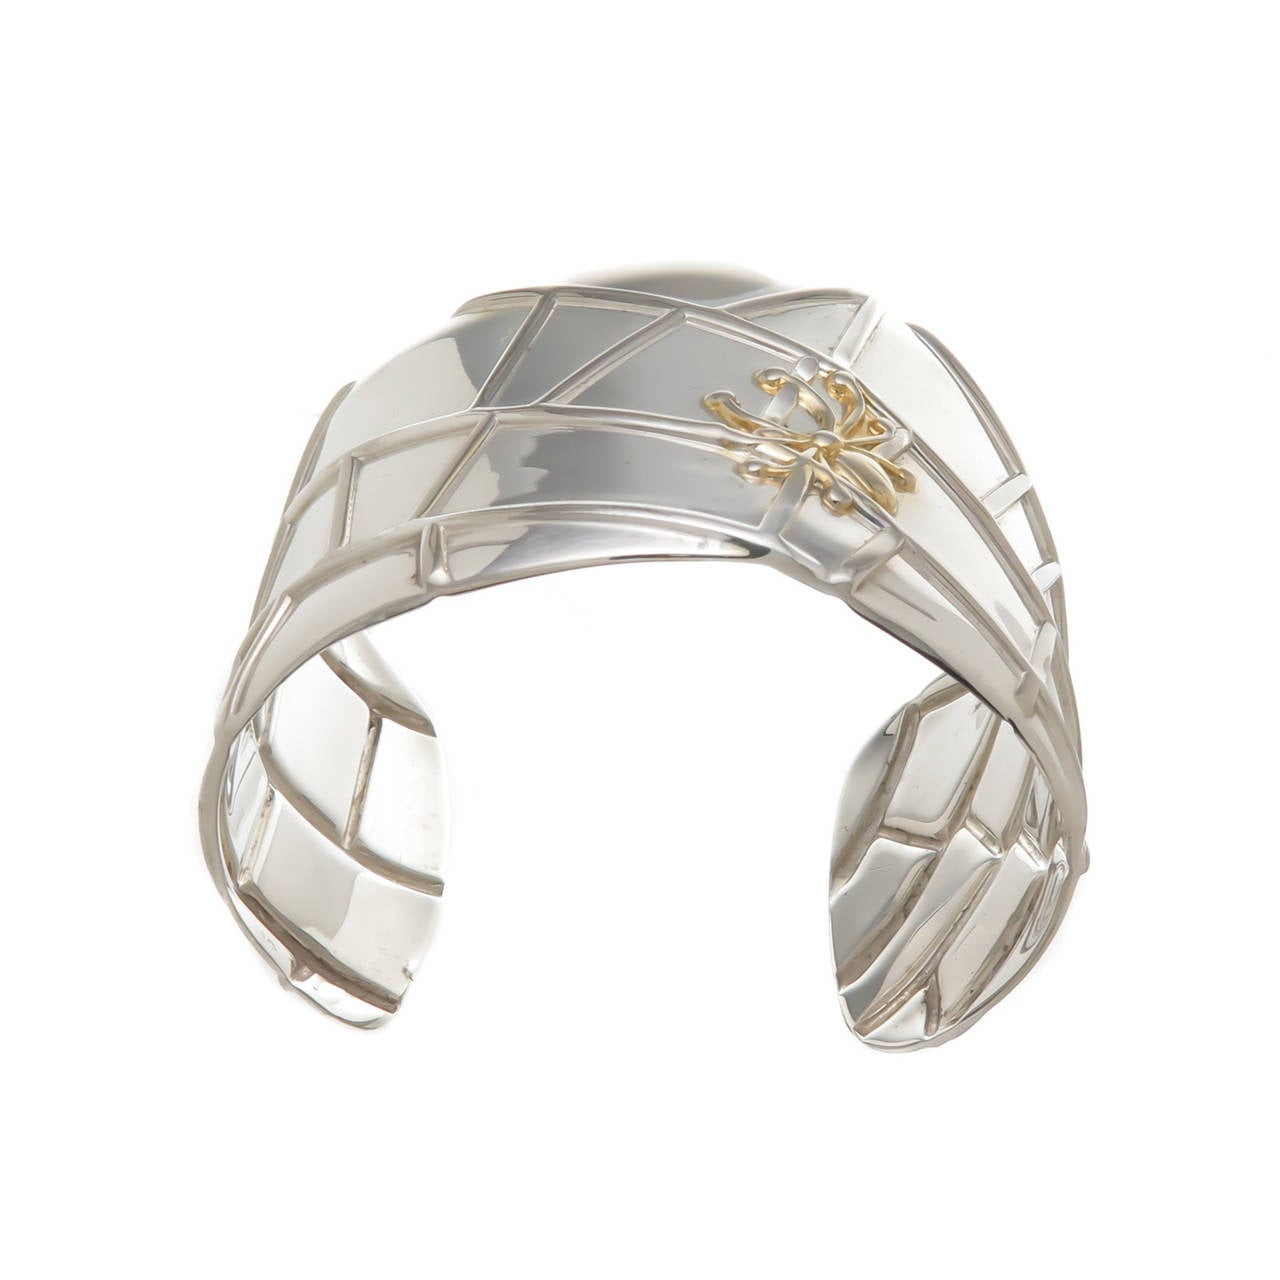 Circa 2003 Tiffany & Company Sterling Silver and 18K yellow Gold Spider Web Cuff Bracelet. Measuring 1 5/8 inch wide, can be adjusted to fit most any wrist.